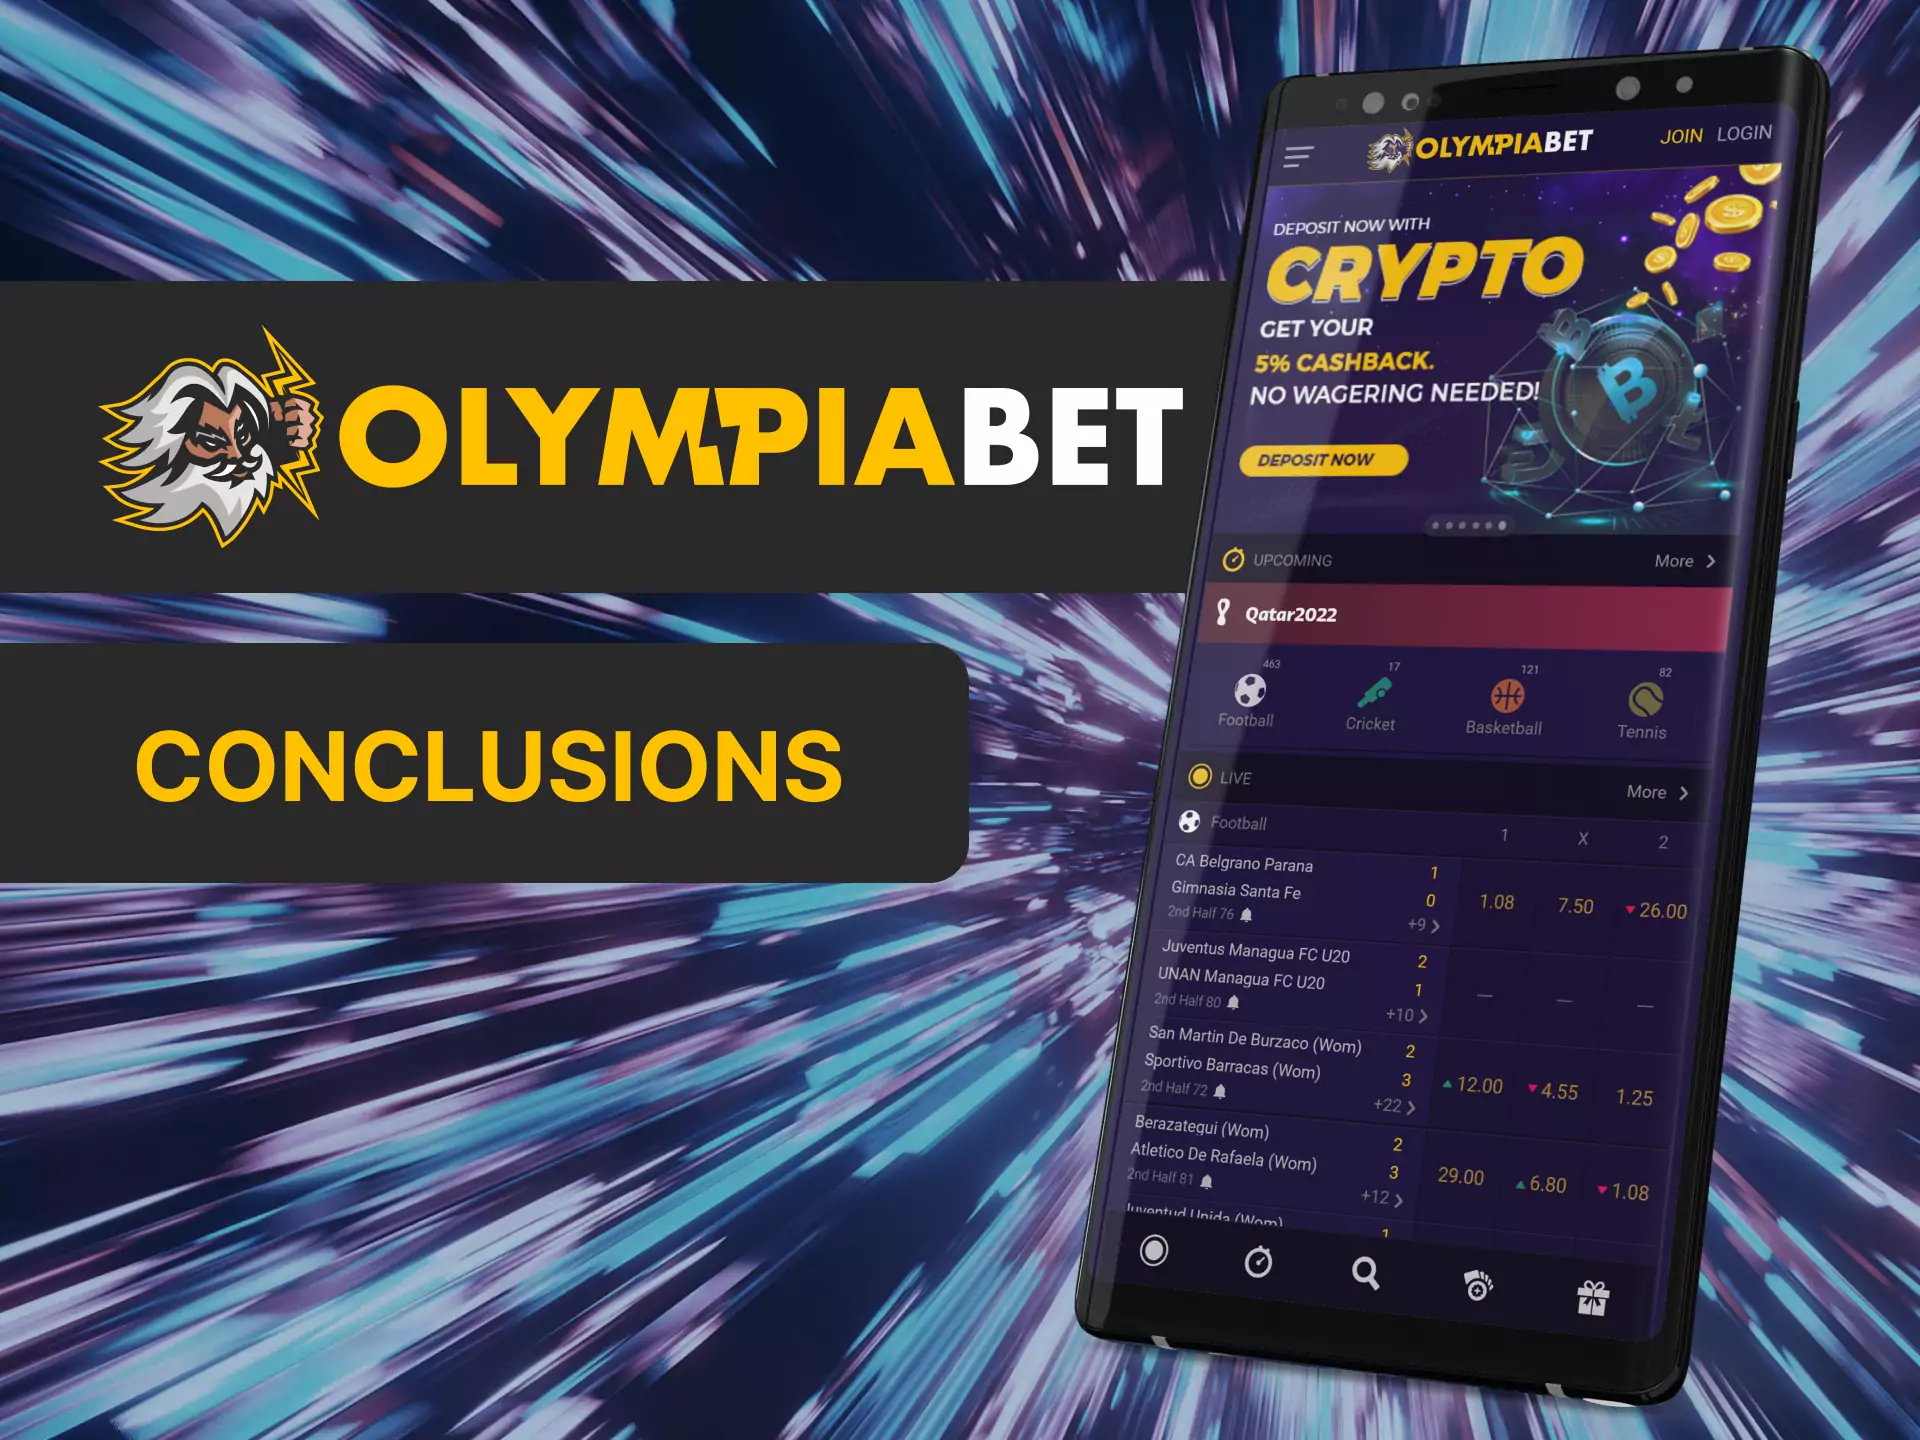 The OlympiaBet app offers players various convenient types of bets on different sports, exciting casino games.